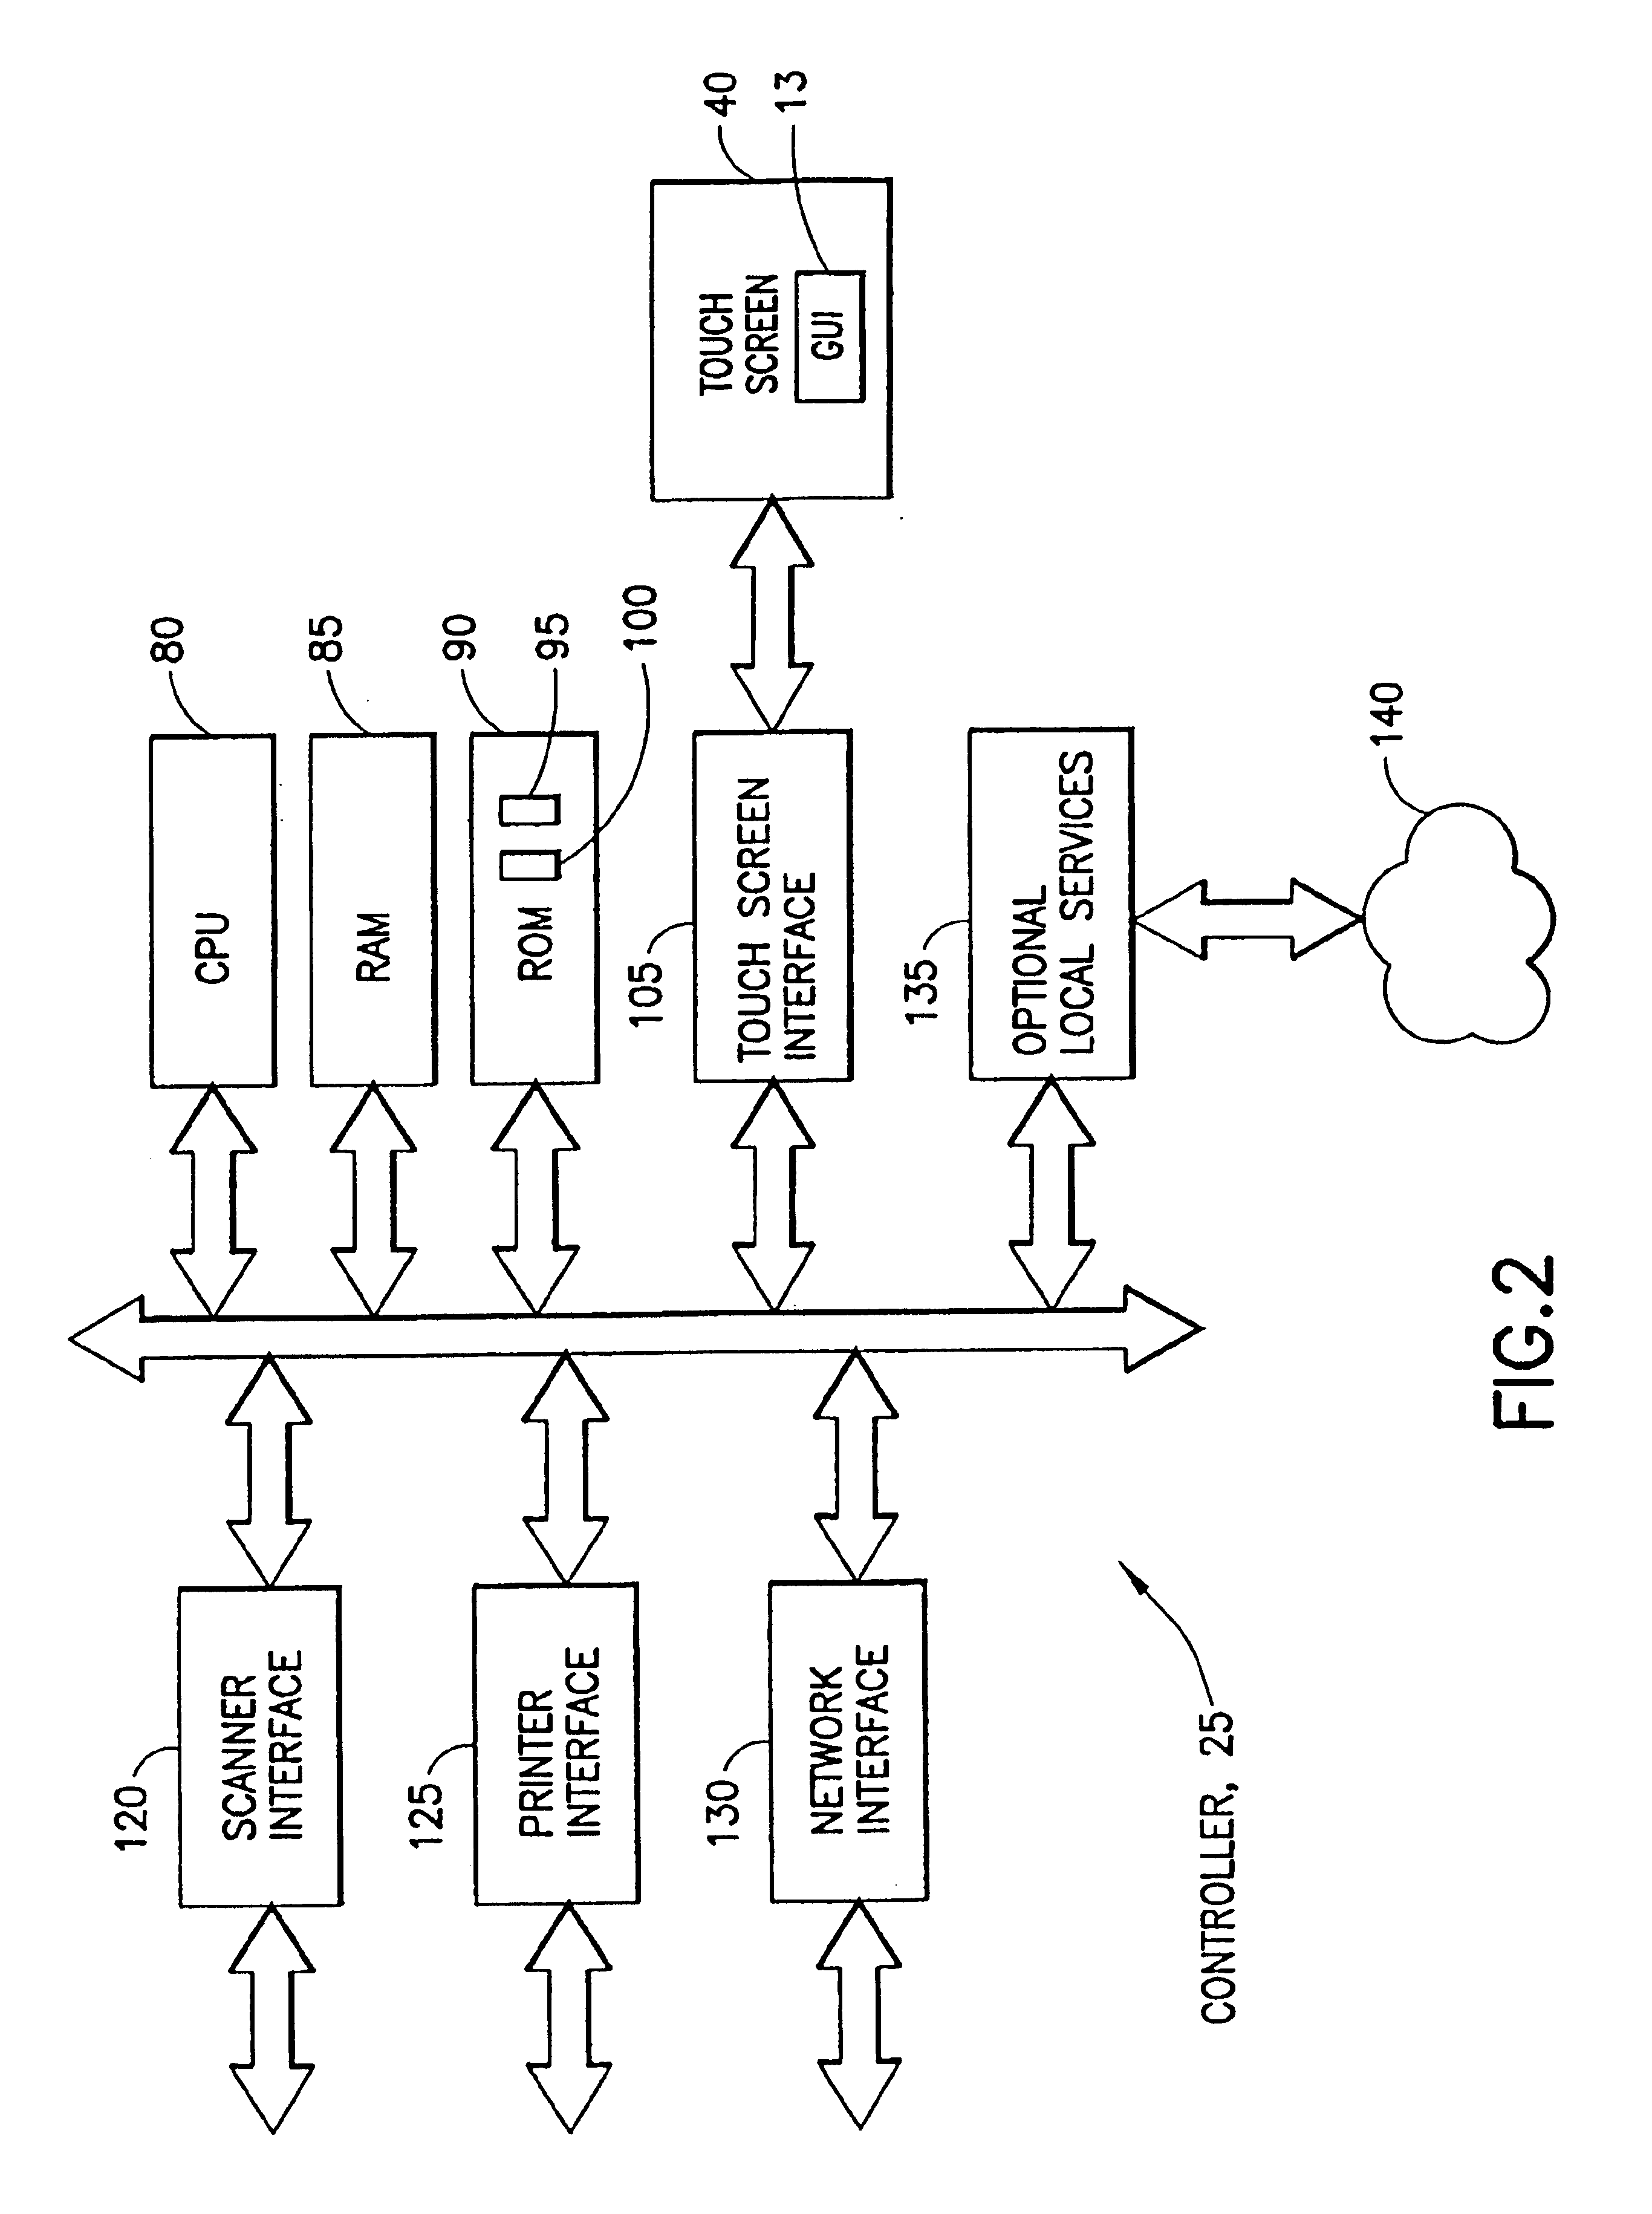 Remote database support in a multifunction office device